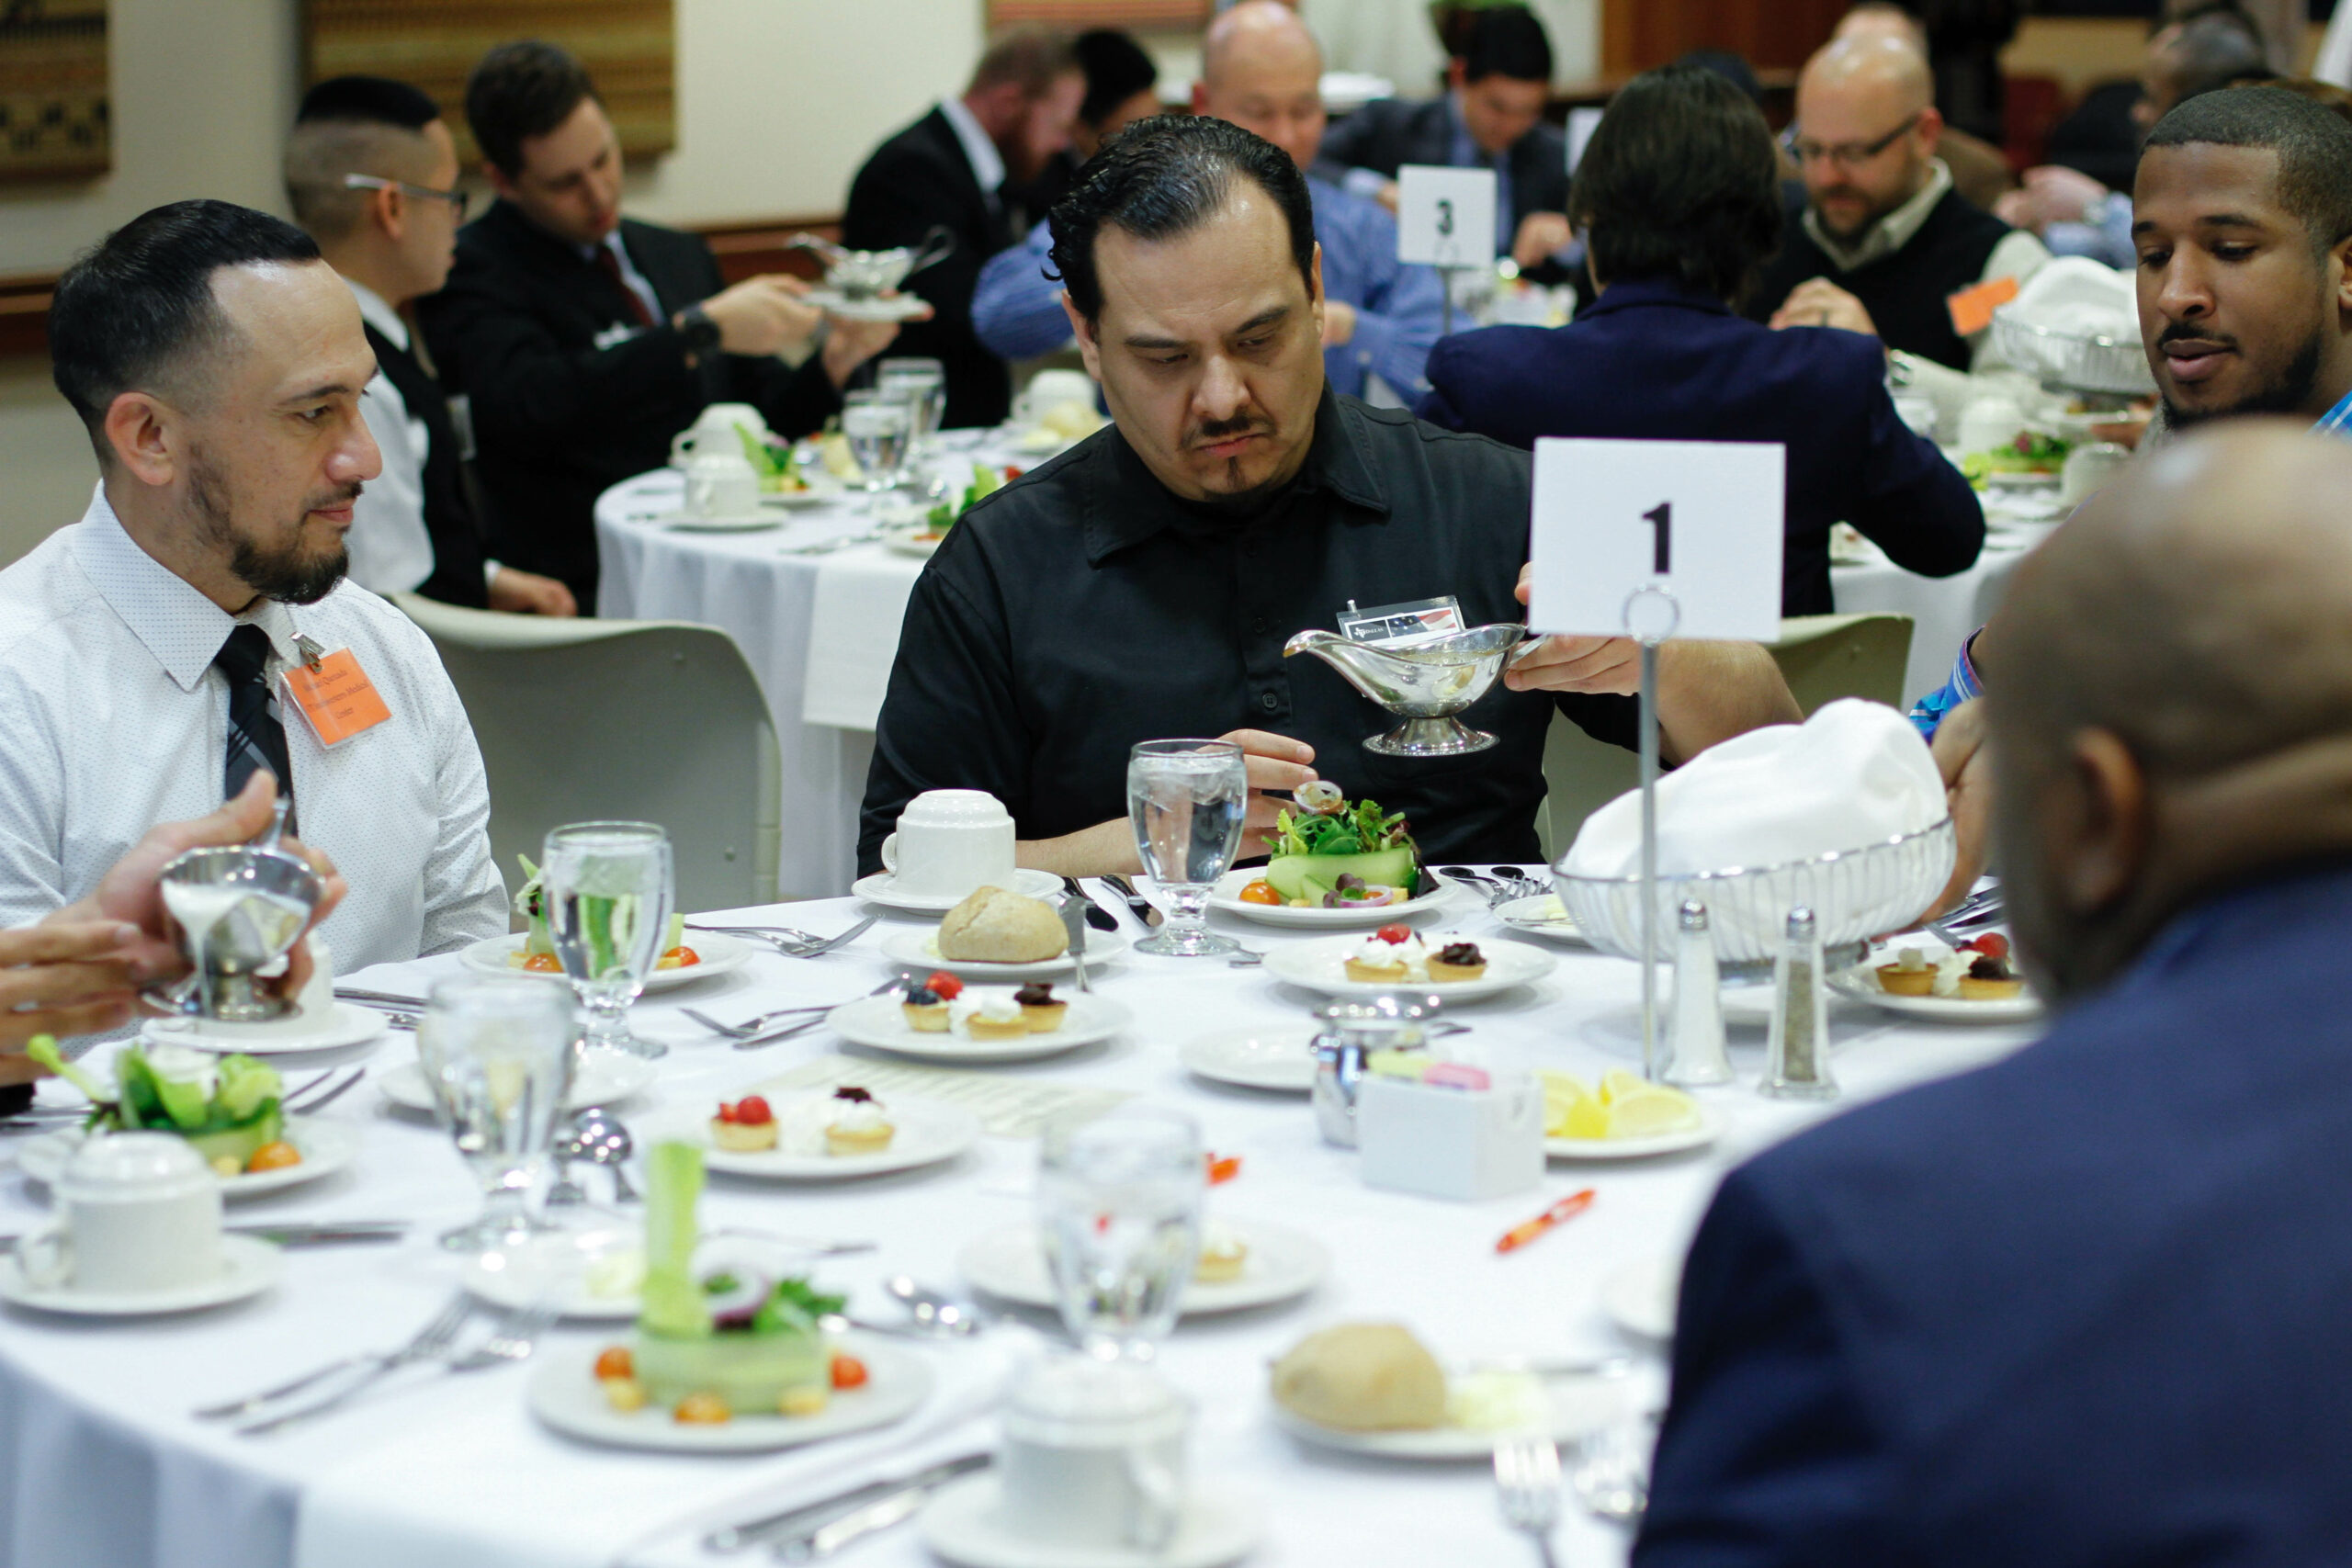 Veterans at The University of Texas at Dallas get to network with corporate recruiters while receiving some guidance on business-meal etiquette at the school's VETiquette dinners.